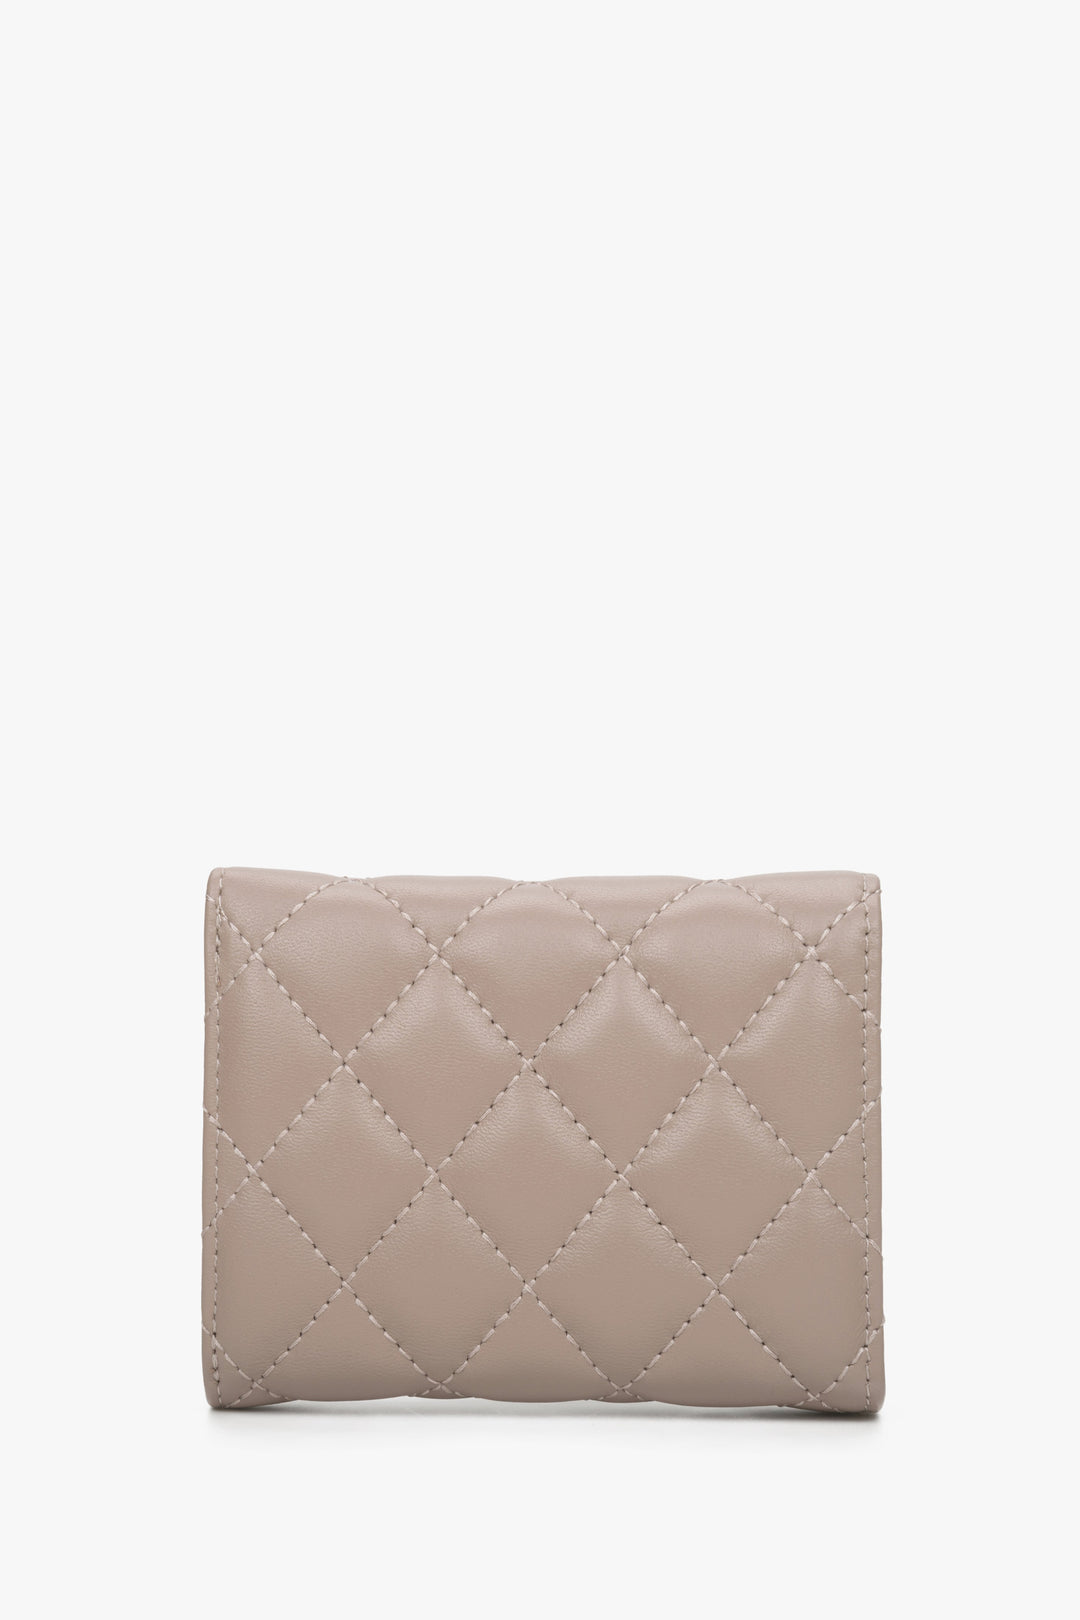 A handy women's light pink wallet with Estro embossing - back side.